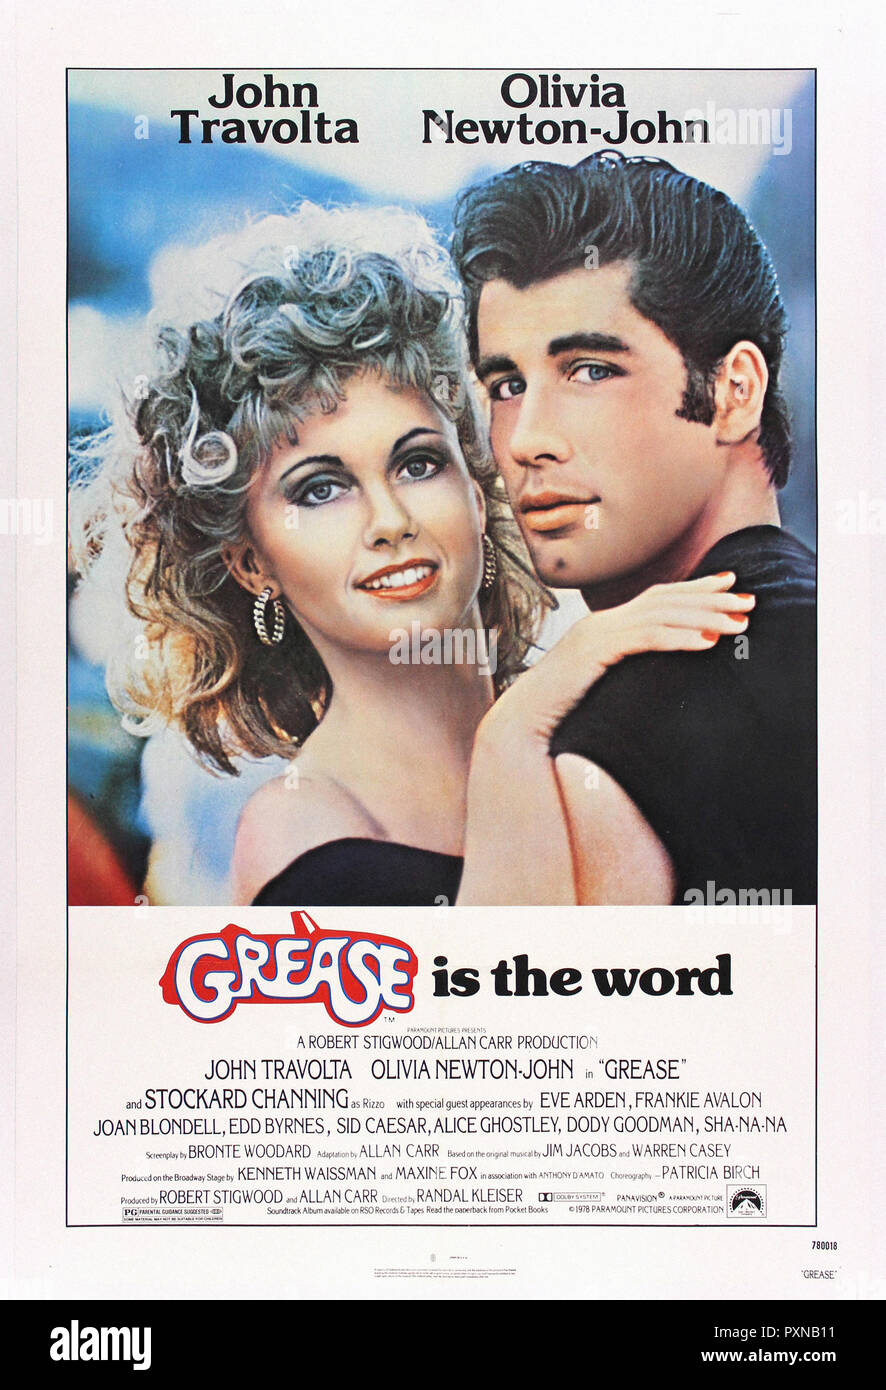 Grease (is the word) - Original movie poster Stock Photo